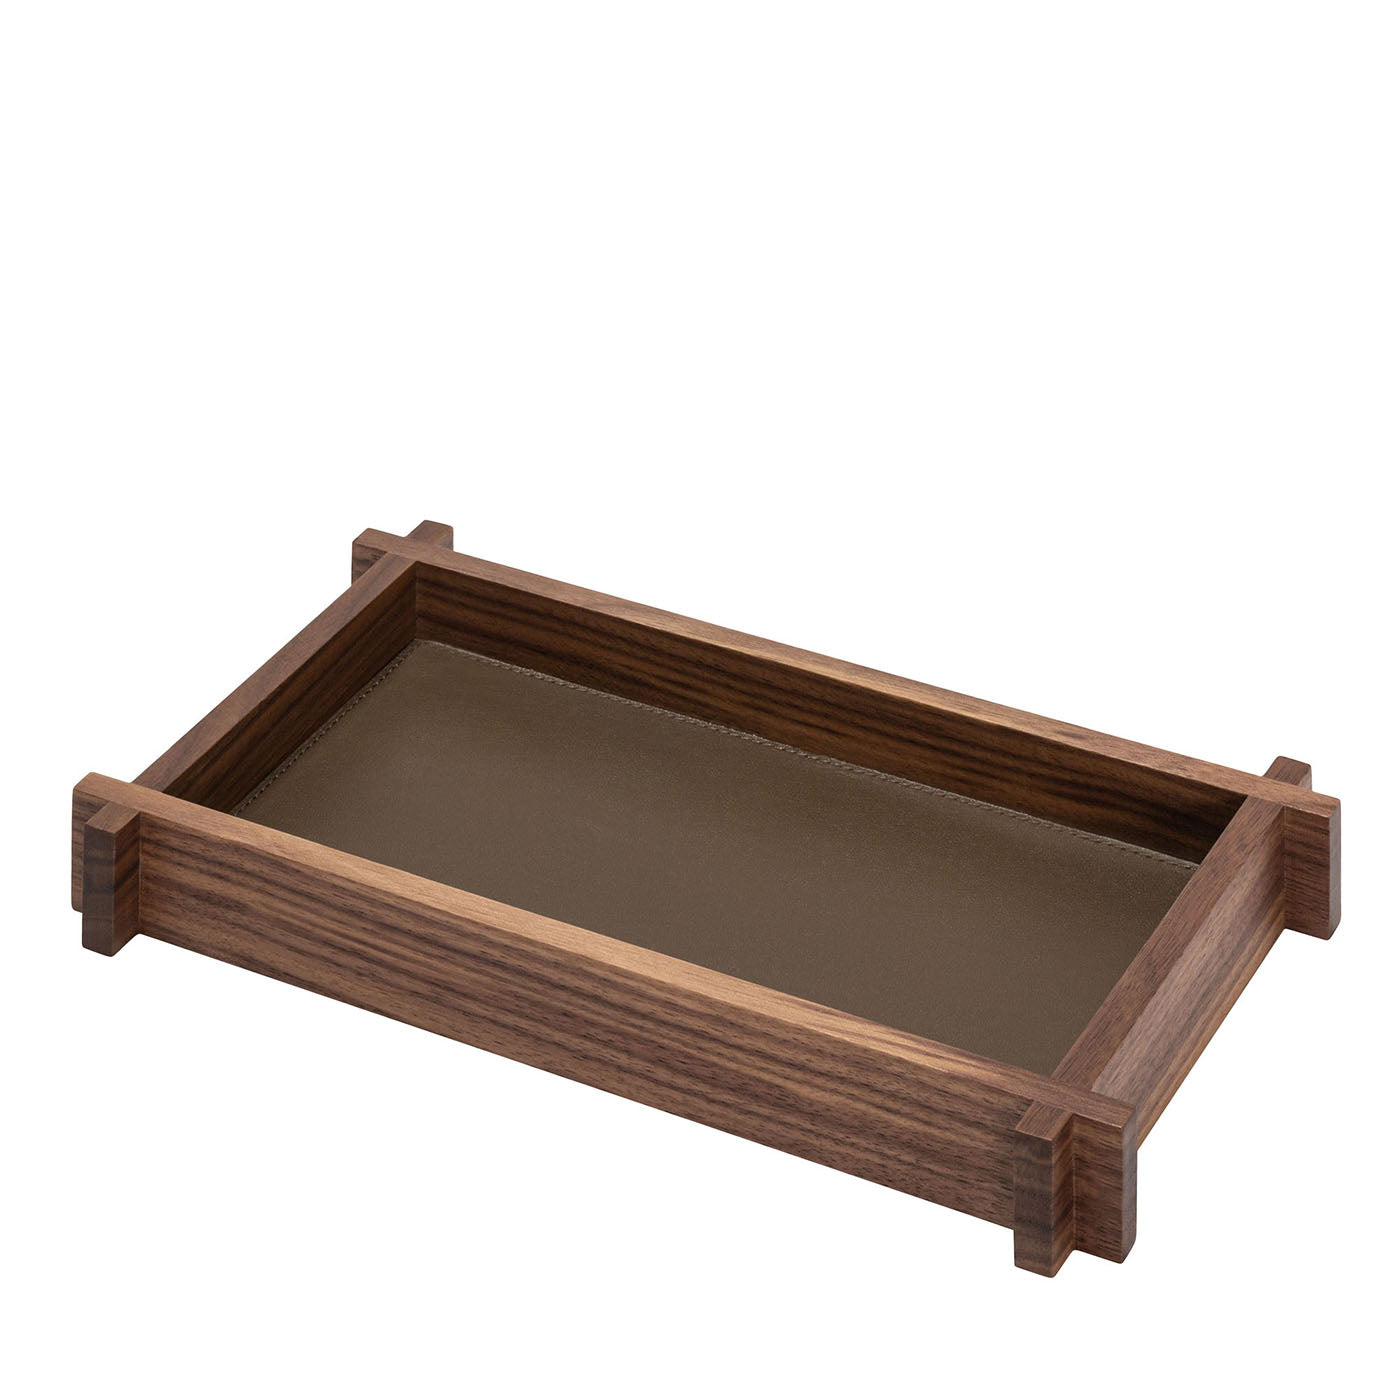 Structura Leather & Wood Brown Small Rectangular Valet Tray - Main view